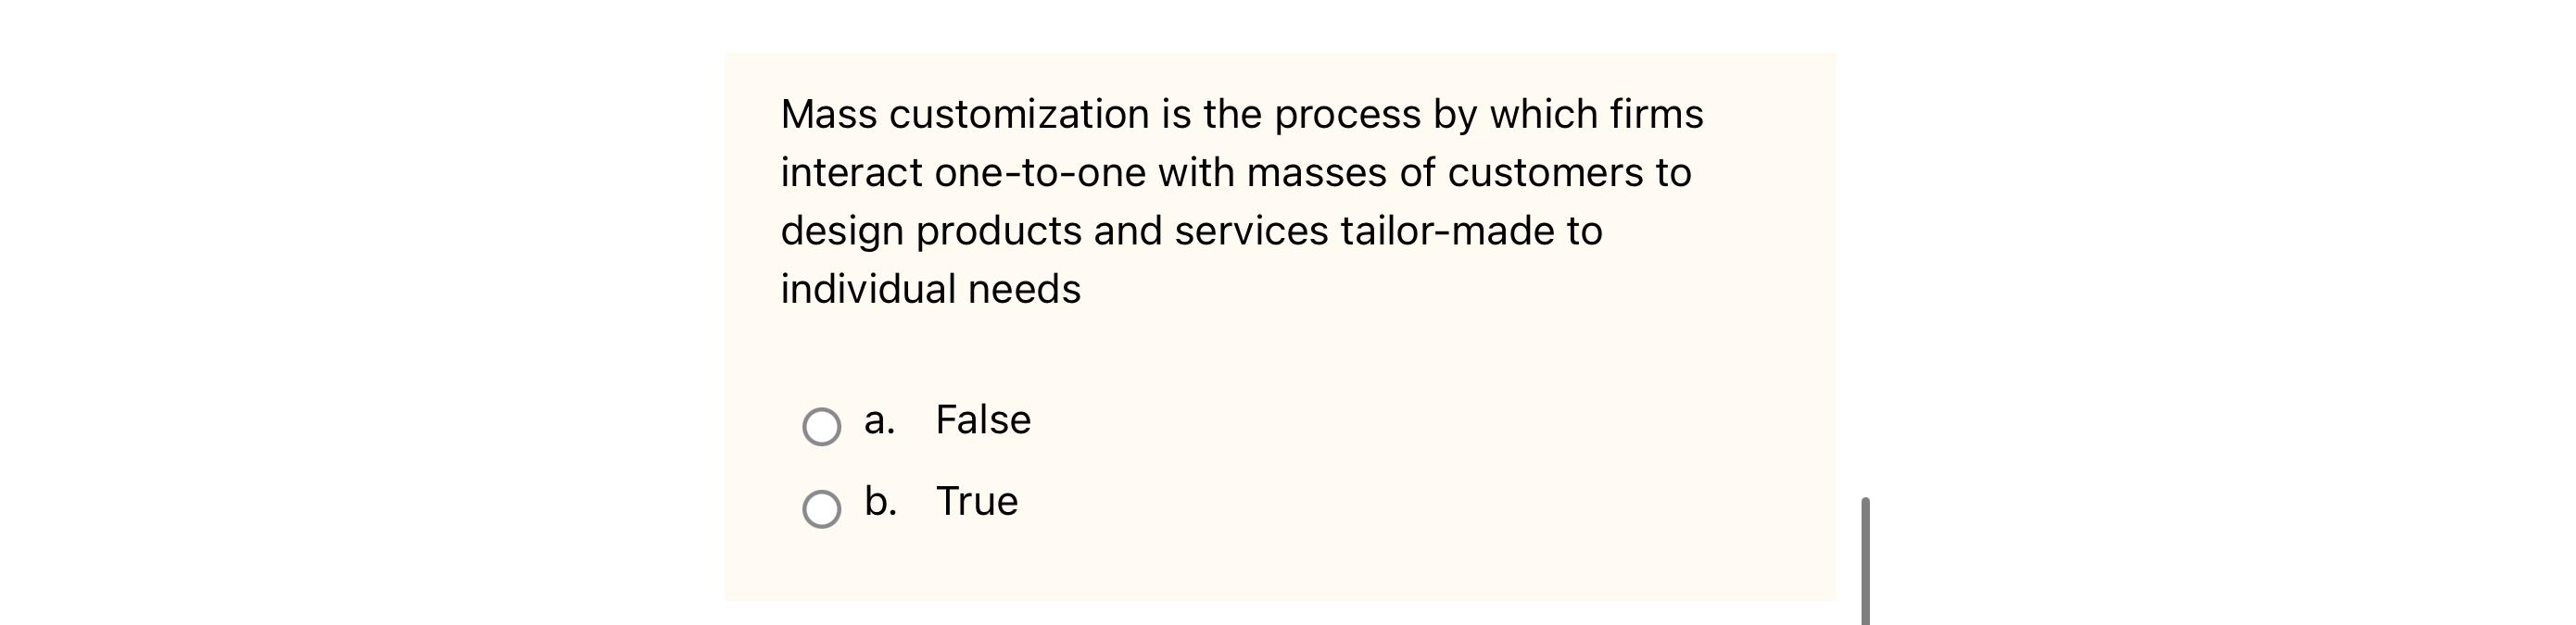 Mass customization is the process by which firms interact one-to-one with masses of customers to design